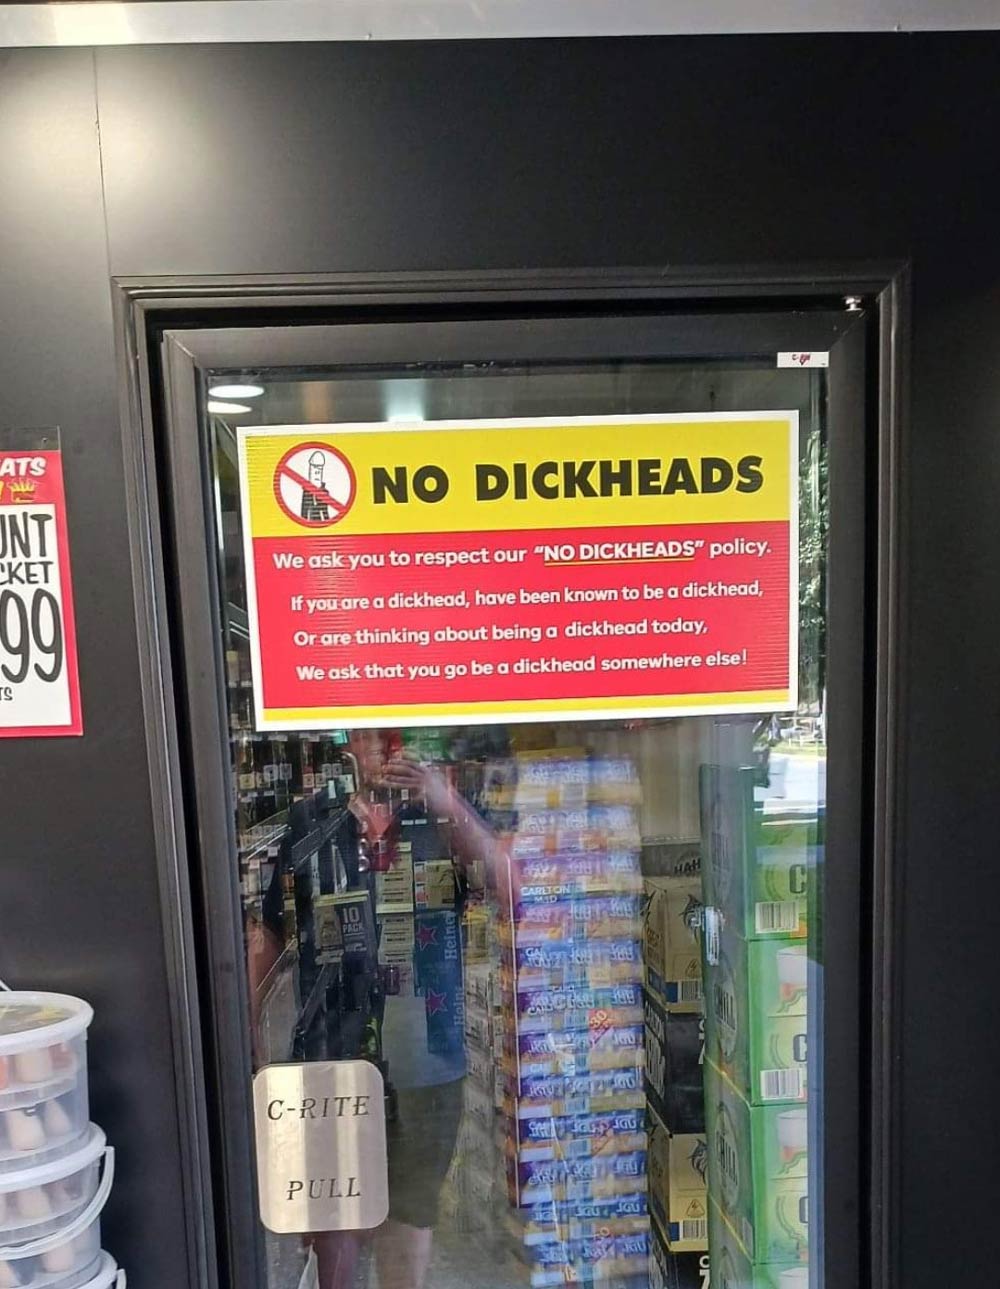 Saw this at a bottle shop in Australia